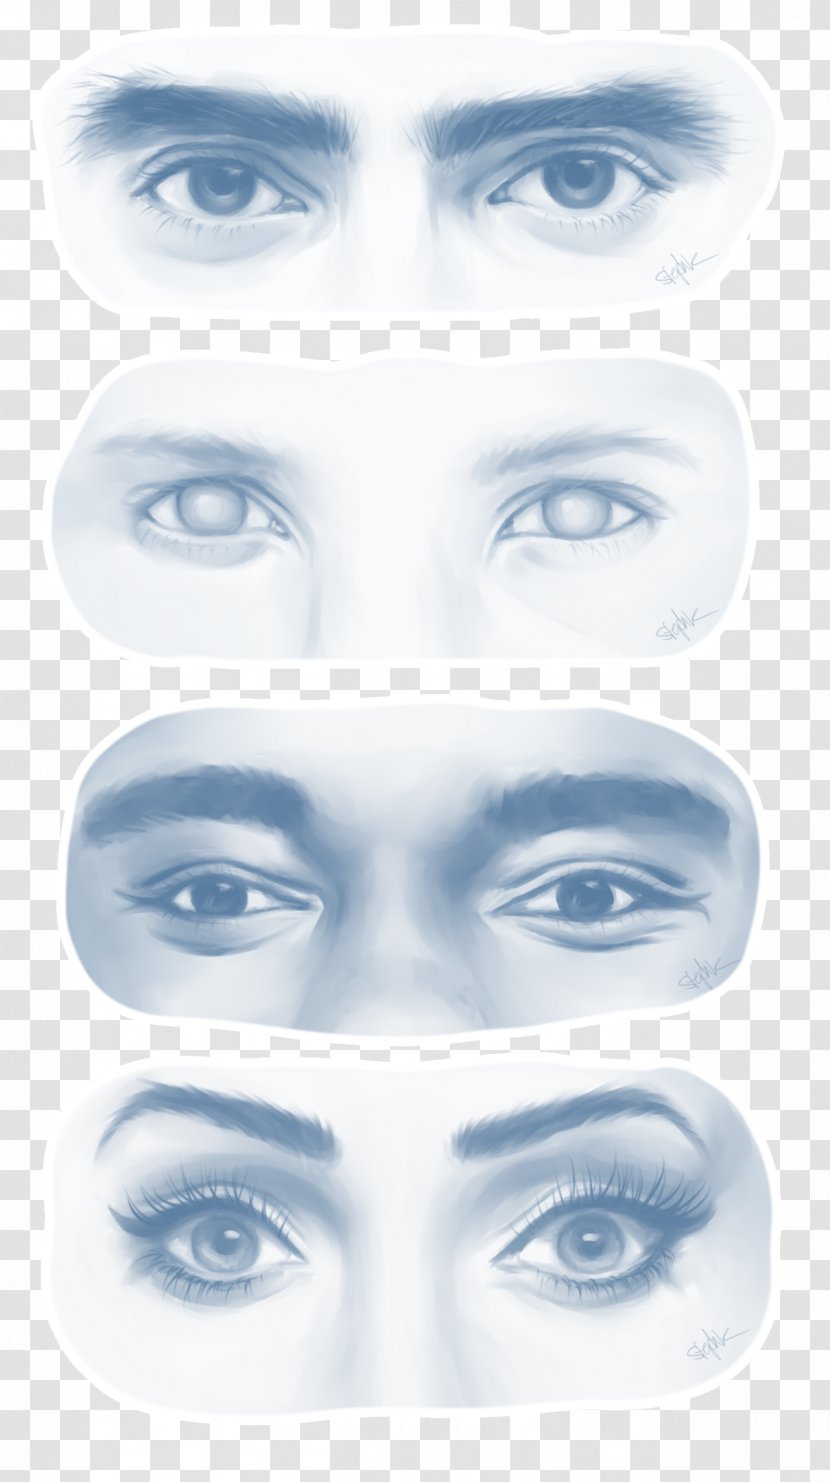 Cheek Eyebrow Chin Forehead Nose - Cartoon - Different Types Nuts Transparent PNG